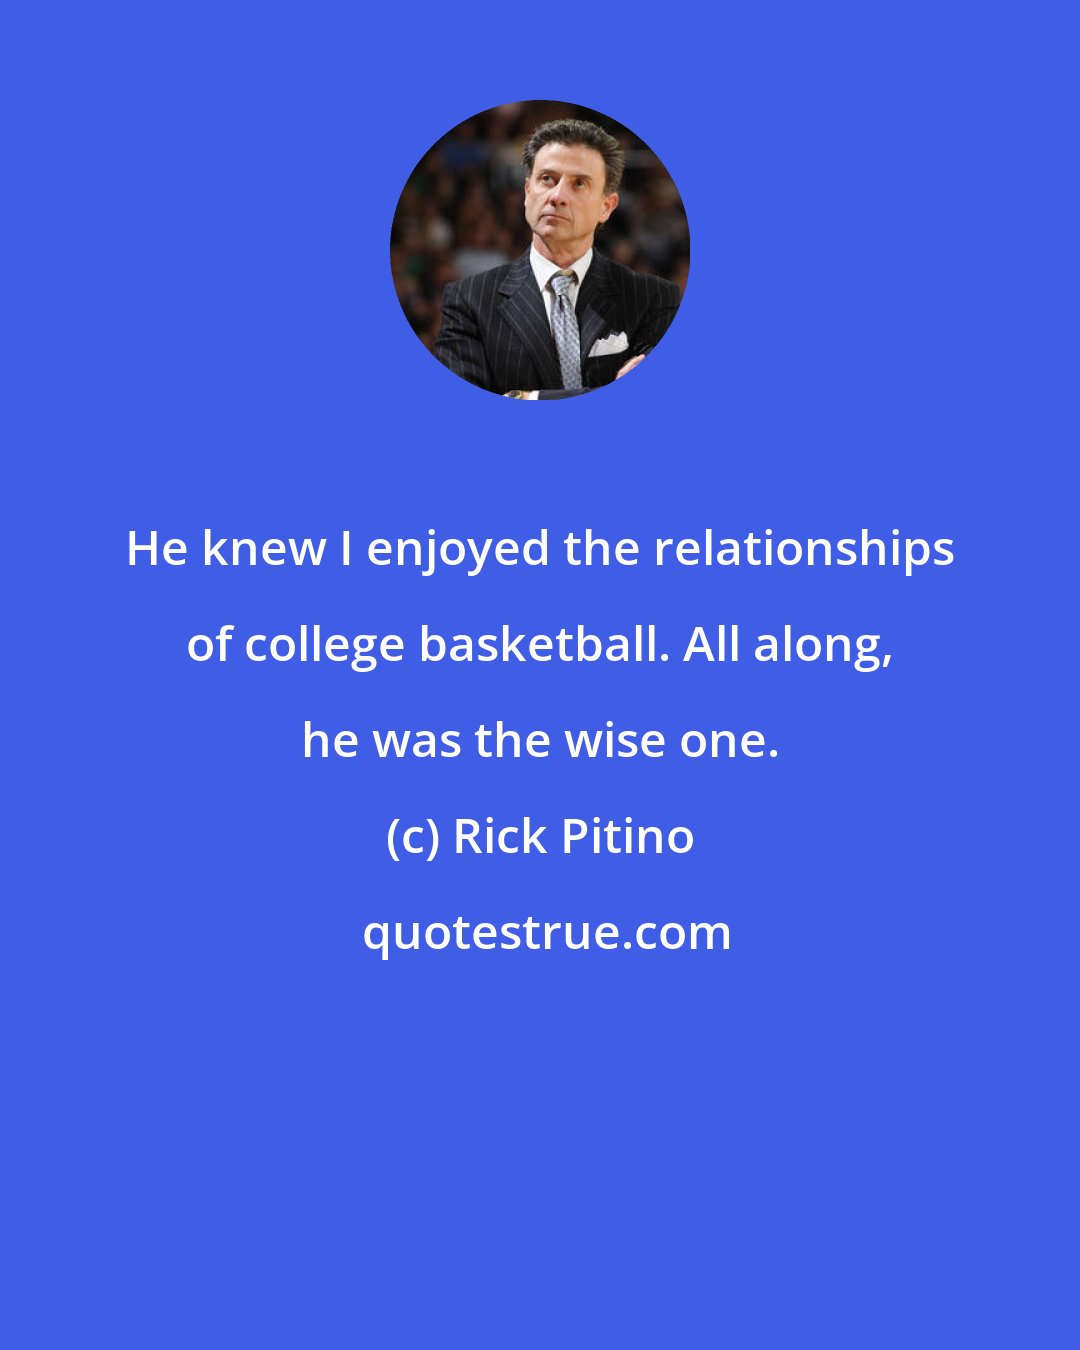 Rick Pitino: He knew I enjoyed the relationships of college basketball. All along, he was the wise one.